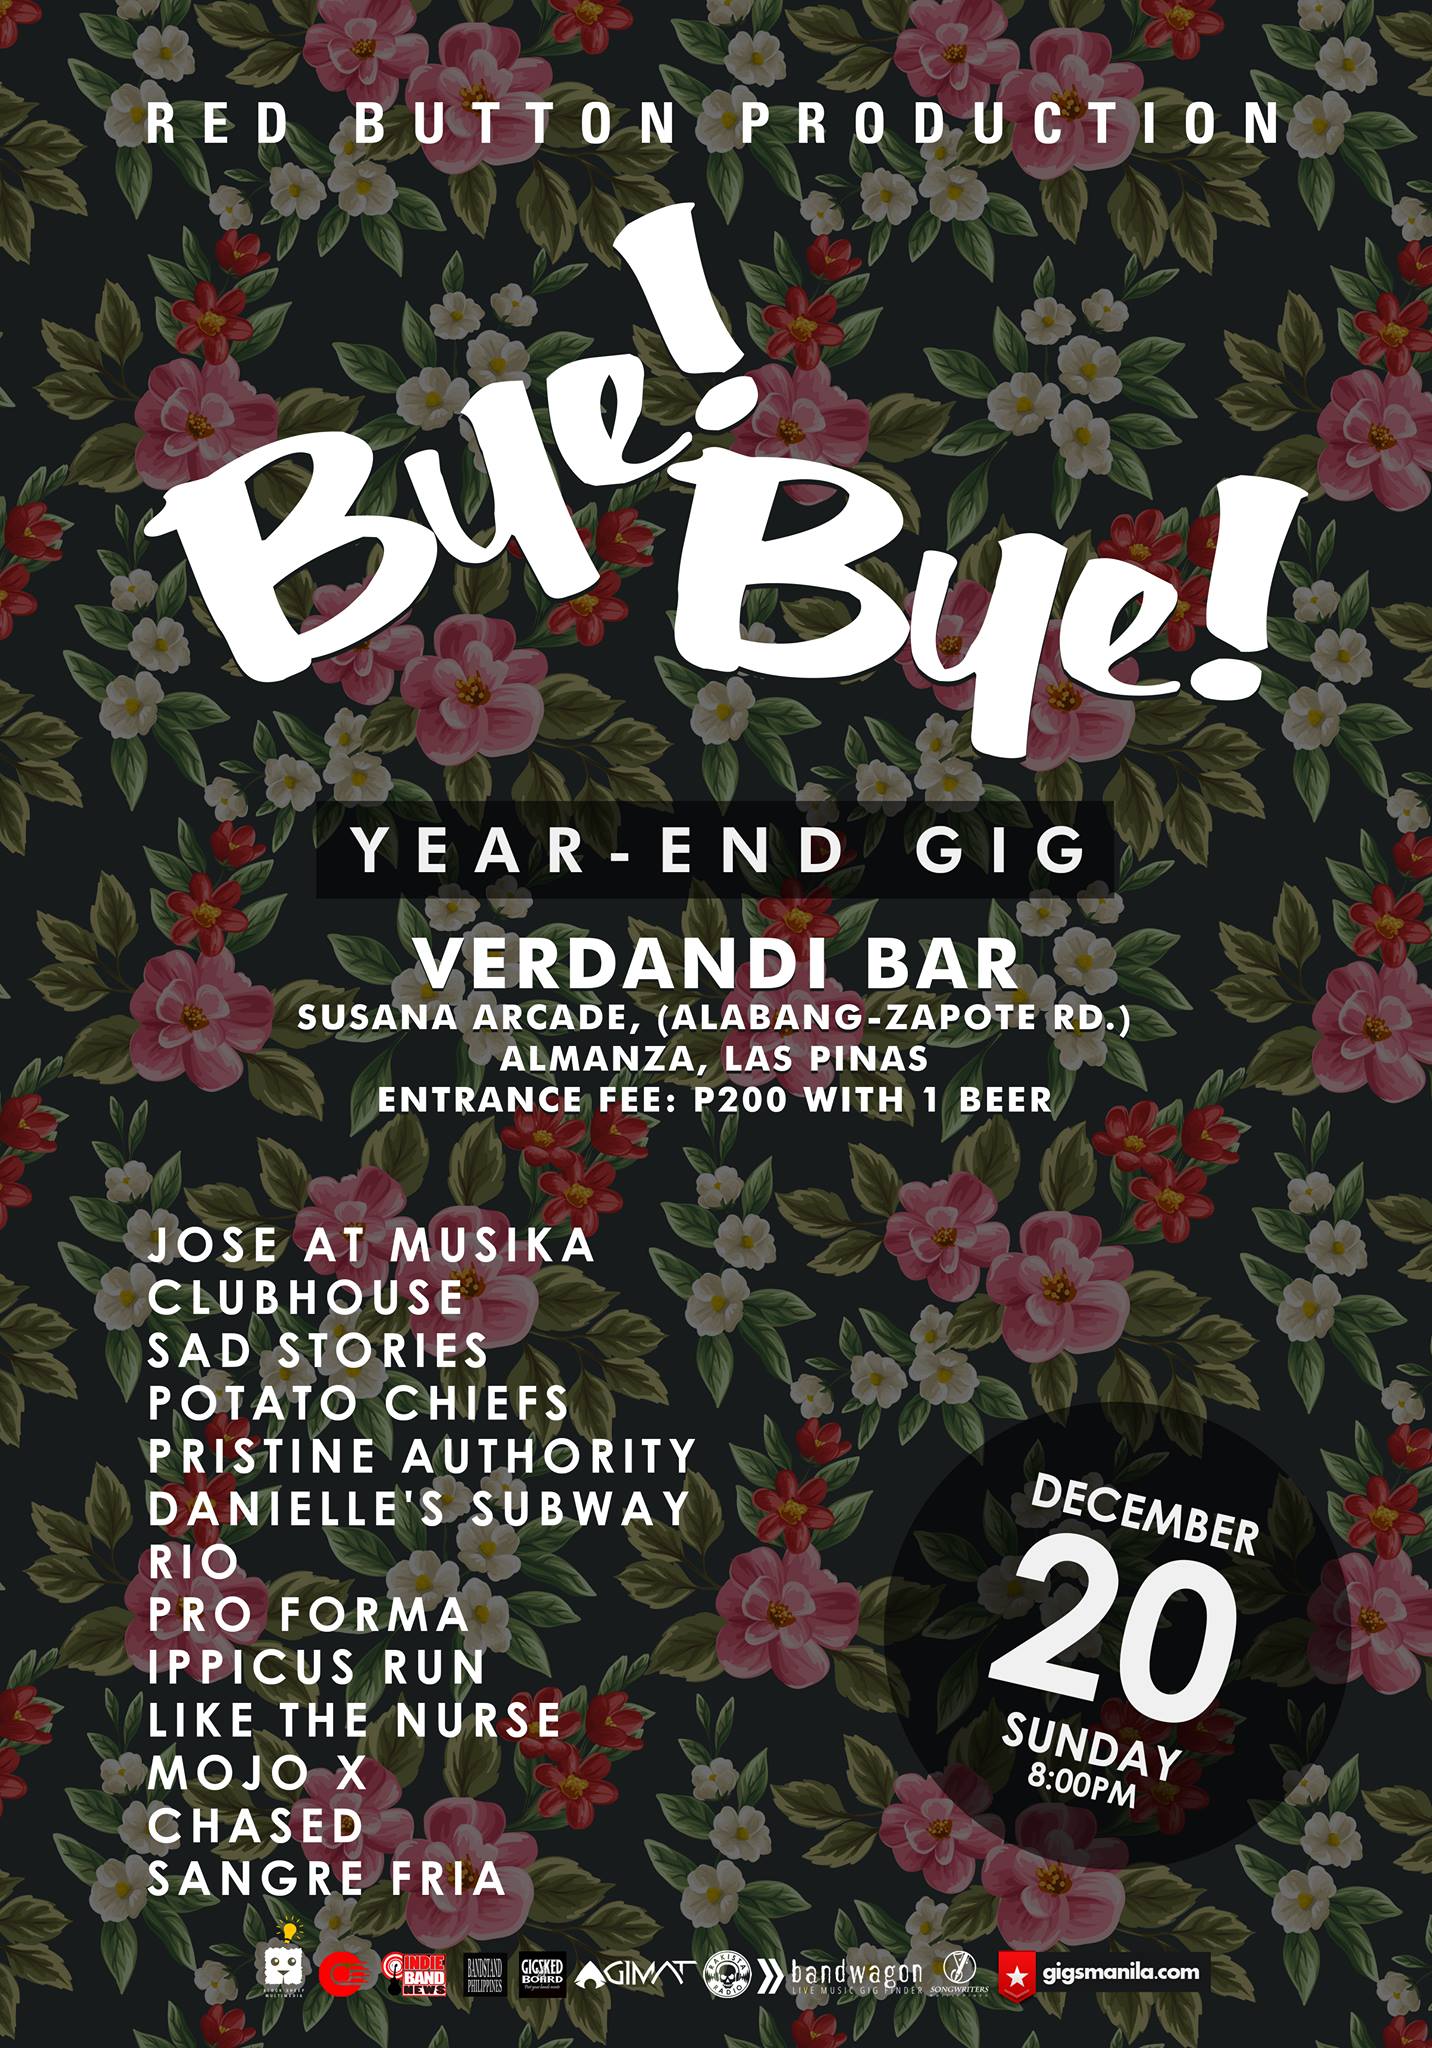 Sunday, December 20 Red Button Production "Bye! Bye!" (Year-end Gig) December 20, Sun. - 8:00PM Verdandi Bar - Susana Arcade, (Alabang-Zapote Rd.) Almanza, Las Pinas Entrance Fee: P200 with 1 beer performances by: Jose at Musika Clubhouse Sad Stories Potato Chiefs Pristine Authority Danielle's Subway Rio Pro Forma Ippicus Run Like The Nurse Mojo X Chased Sangre Fria Event Link: https://www.facebook.com/events/1661856880758701/